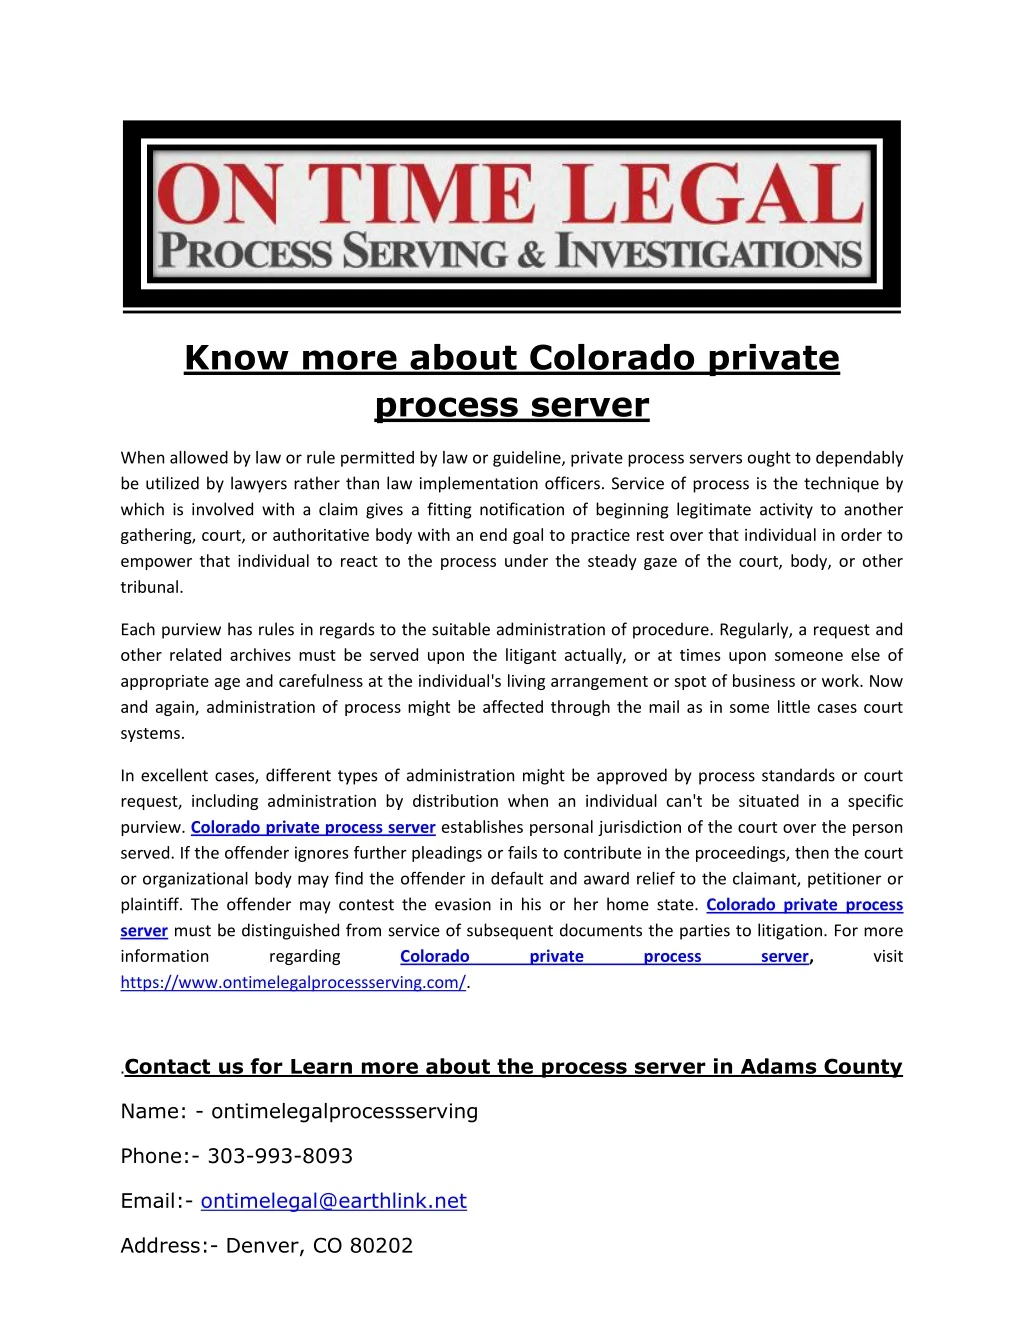 know more about colorado private process server